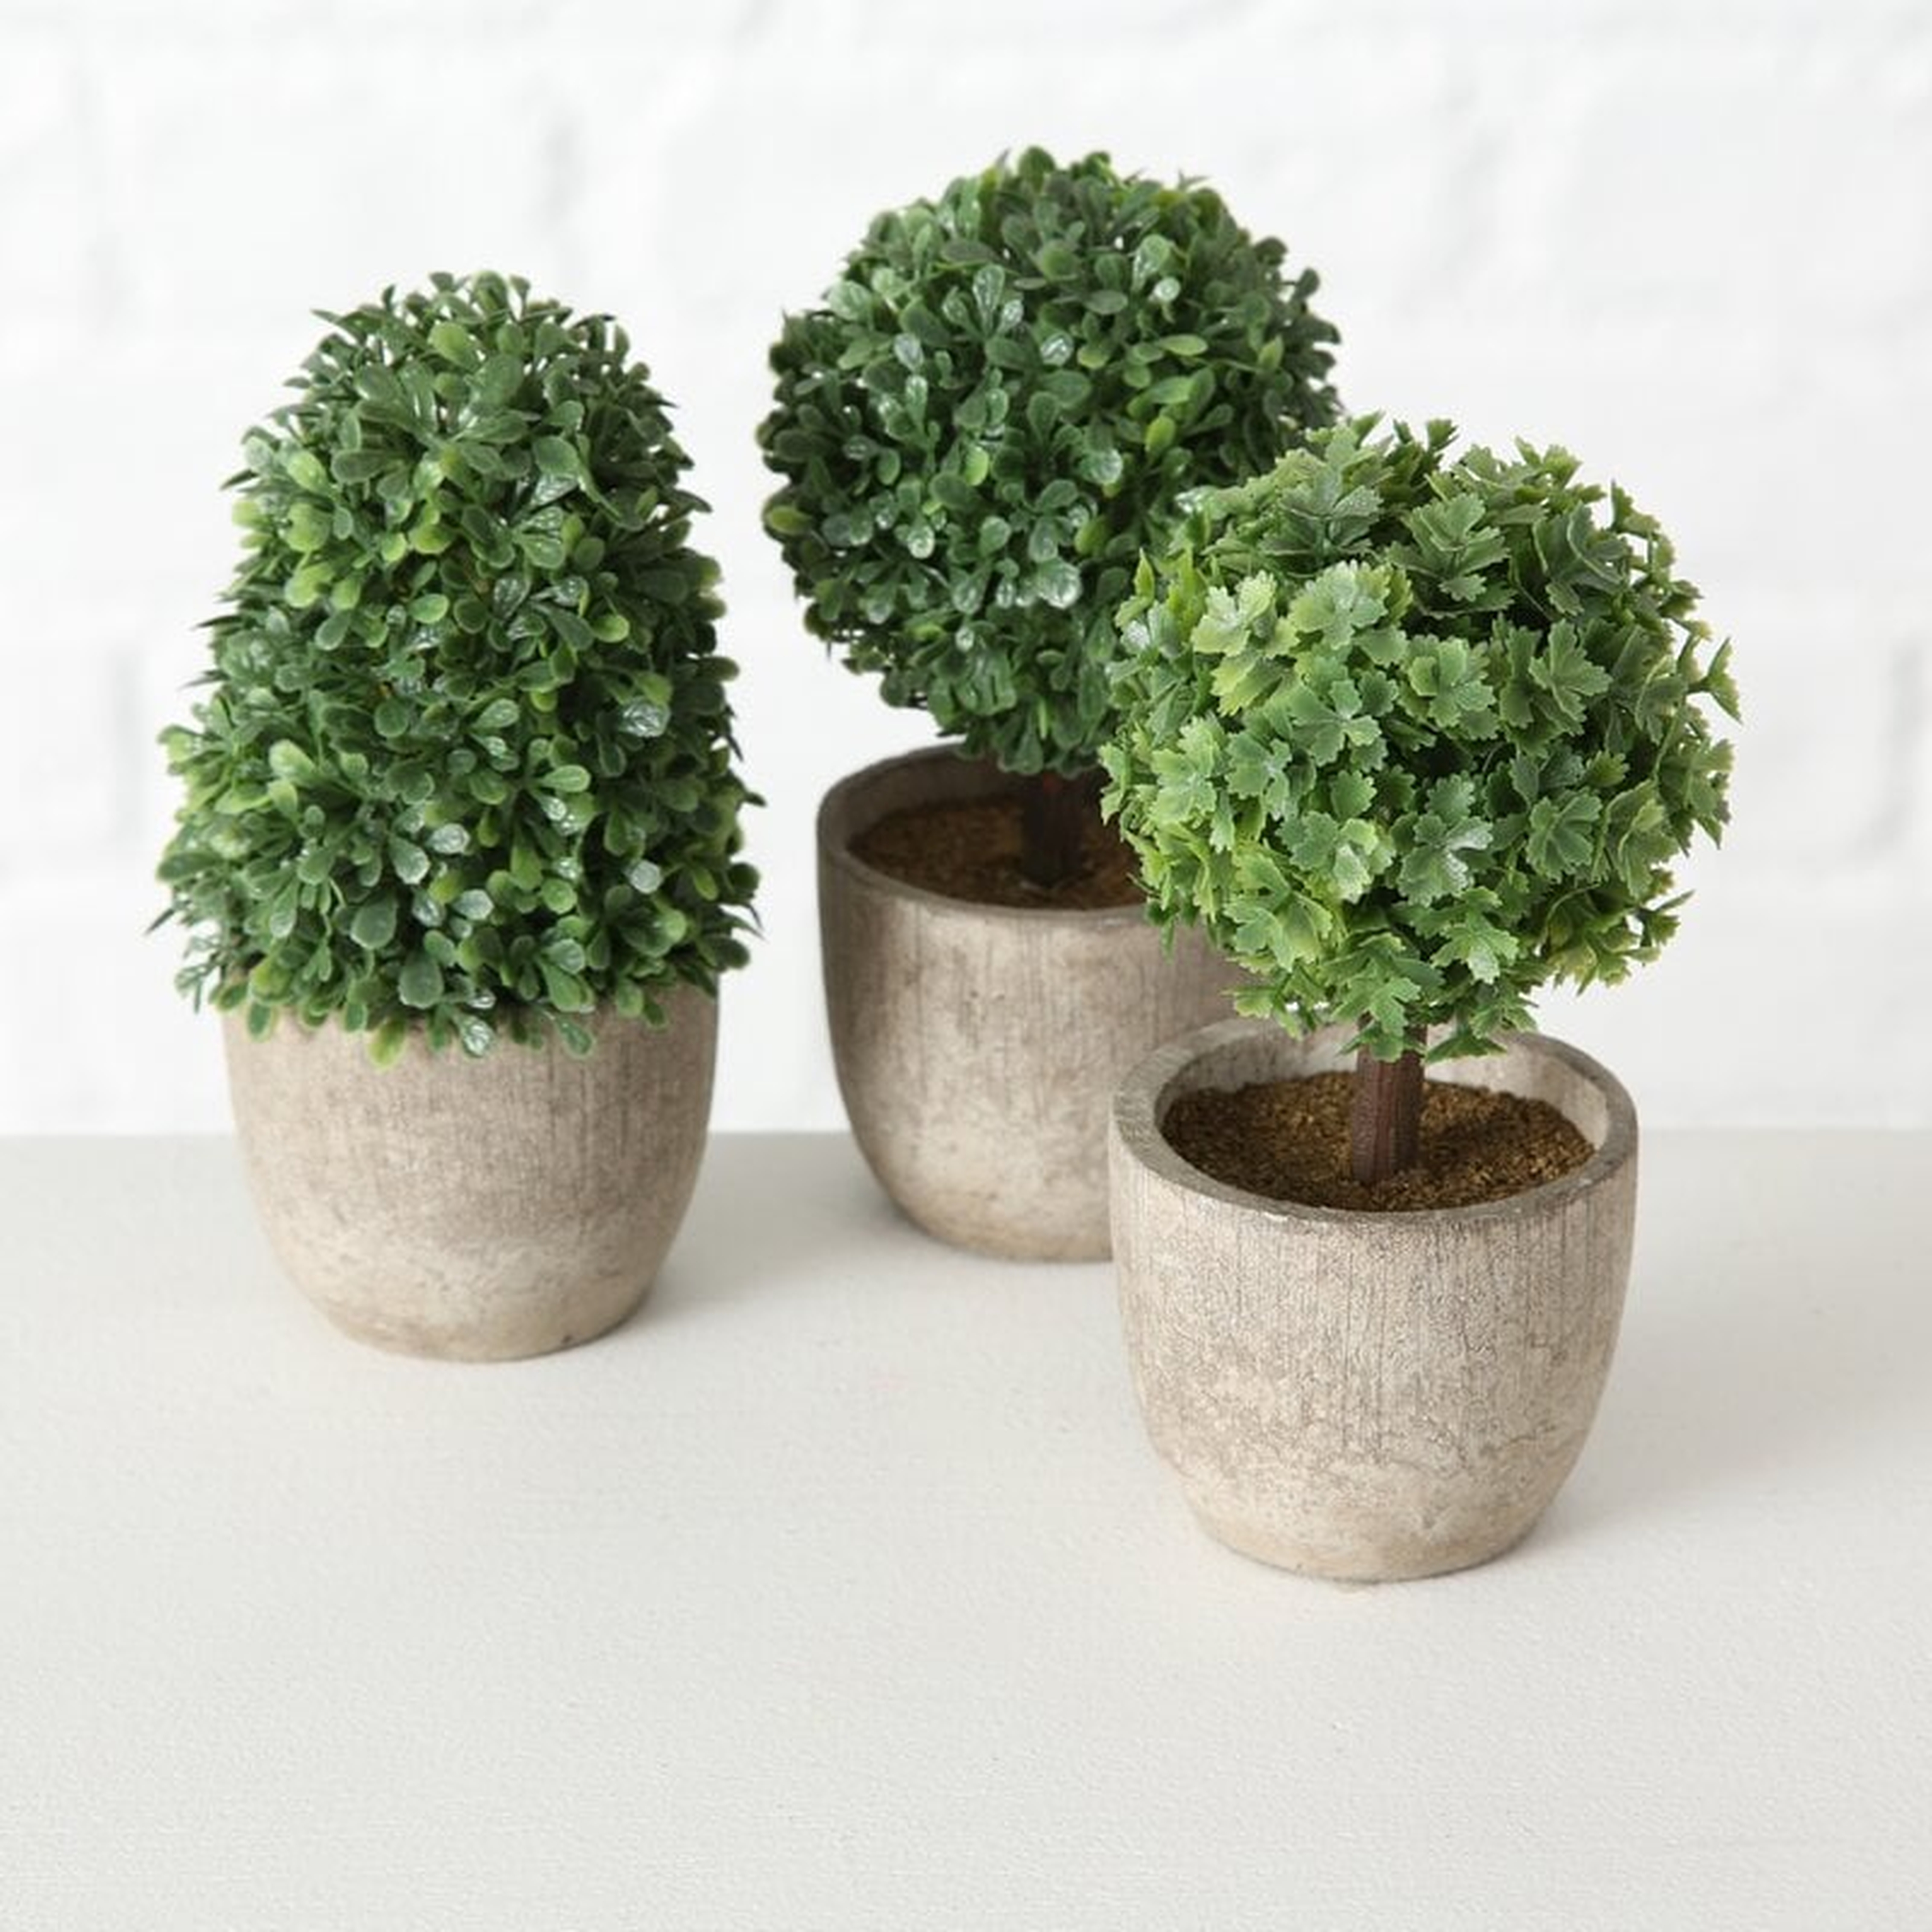 3 Piece Realistic Faux Boxwood Topiary in Pot Set - Wayfair